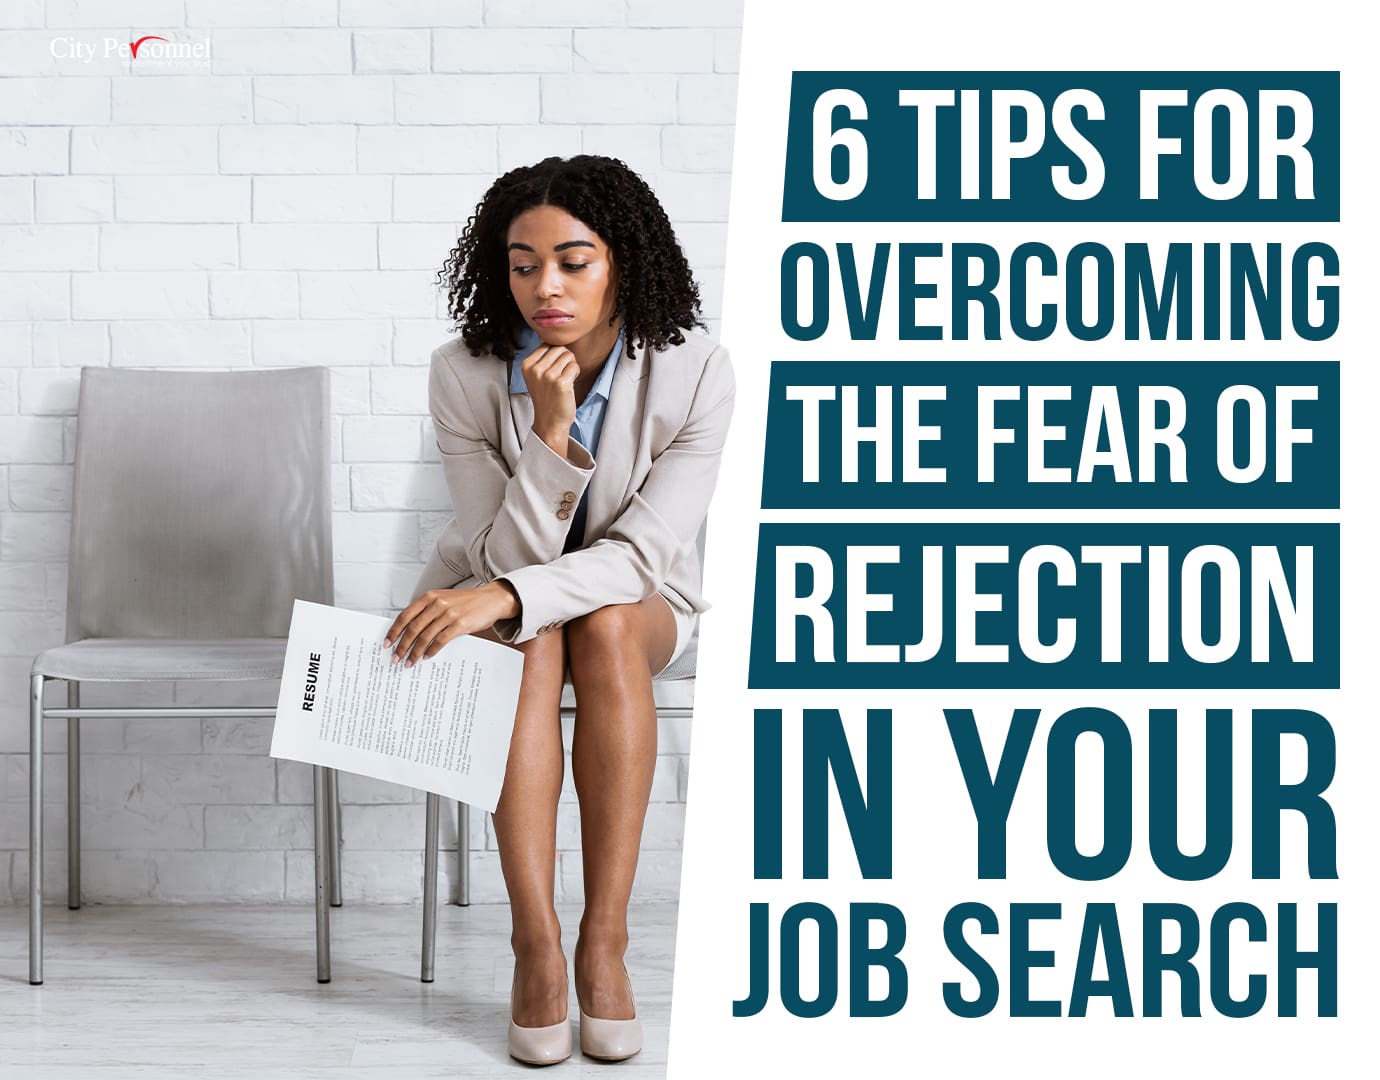 6 tips for overcoming the fear of rejection in your job search